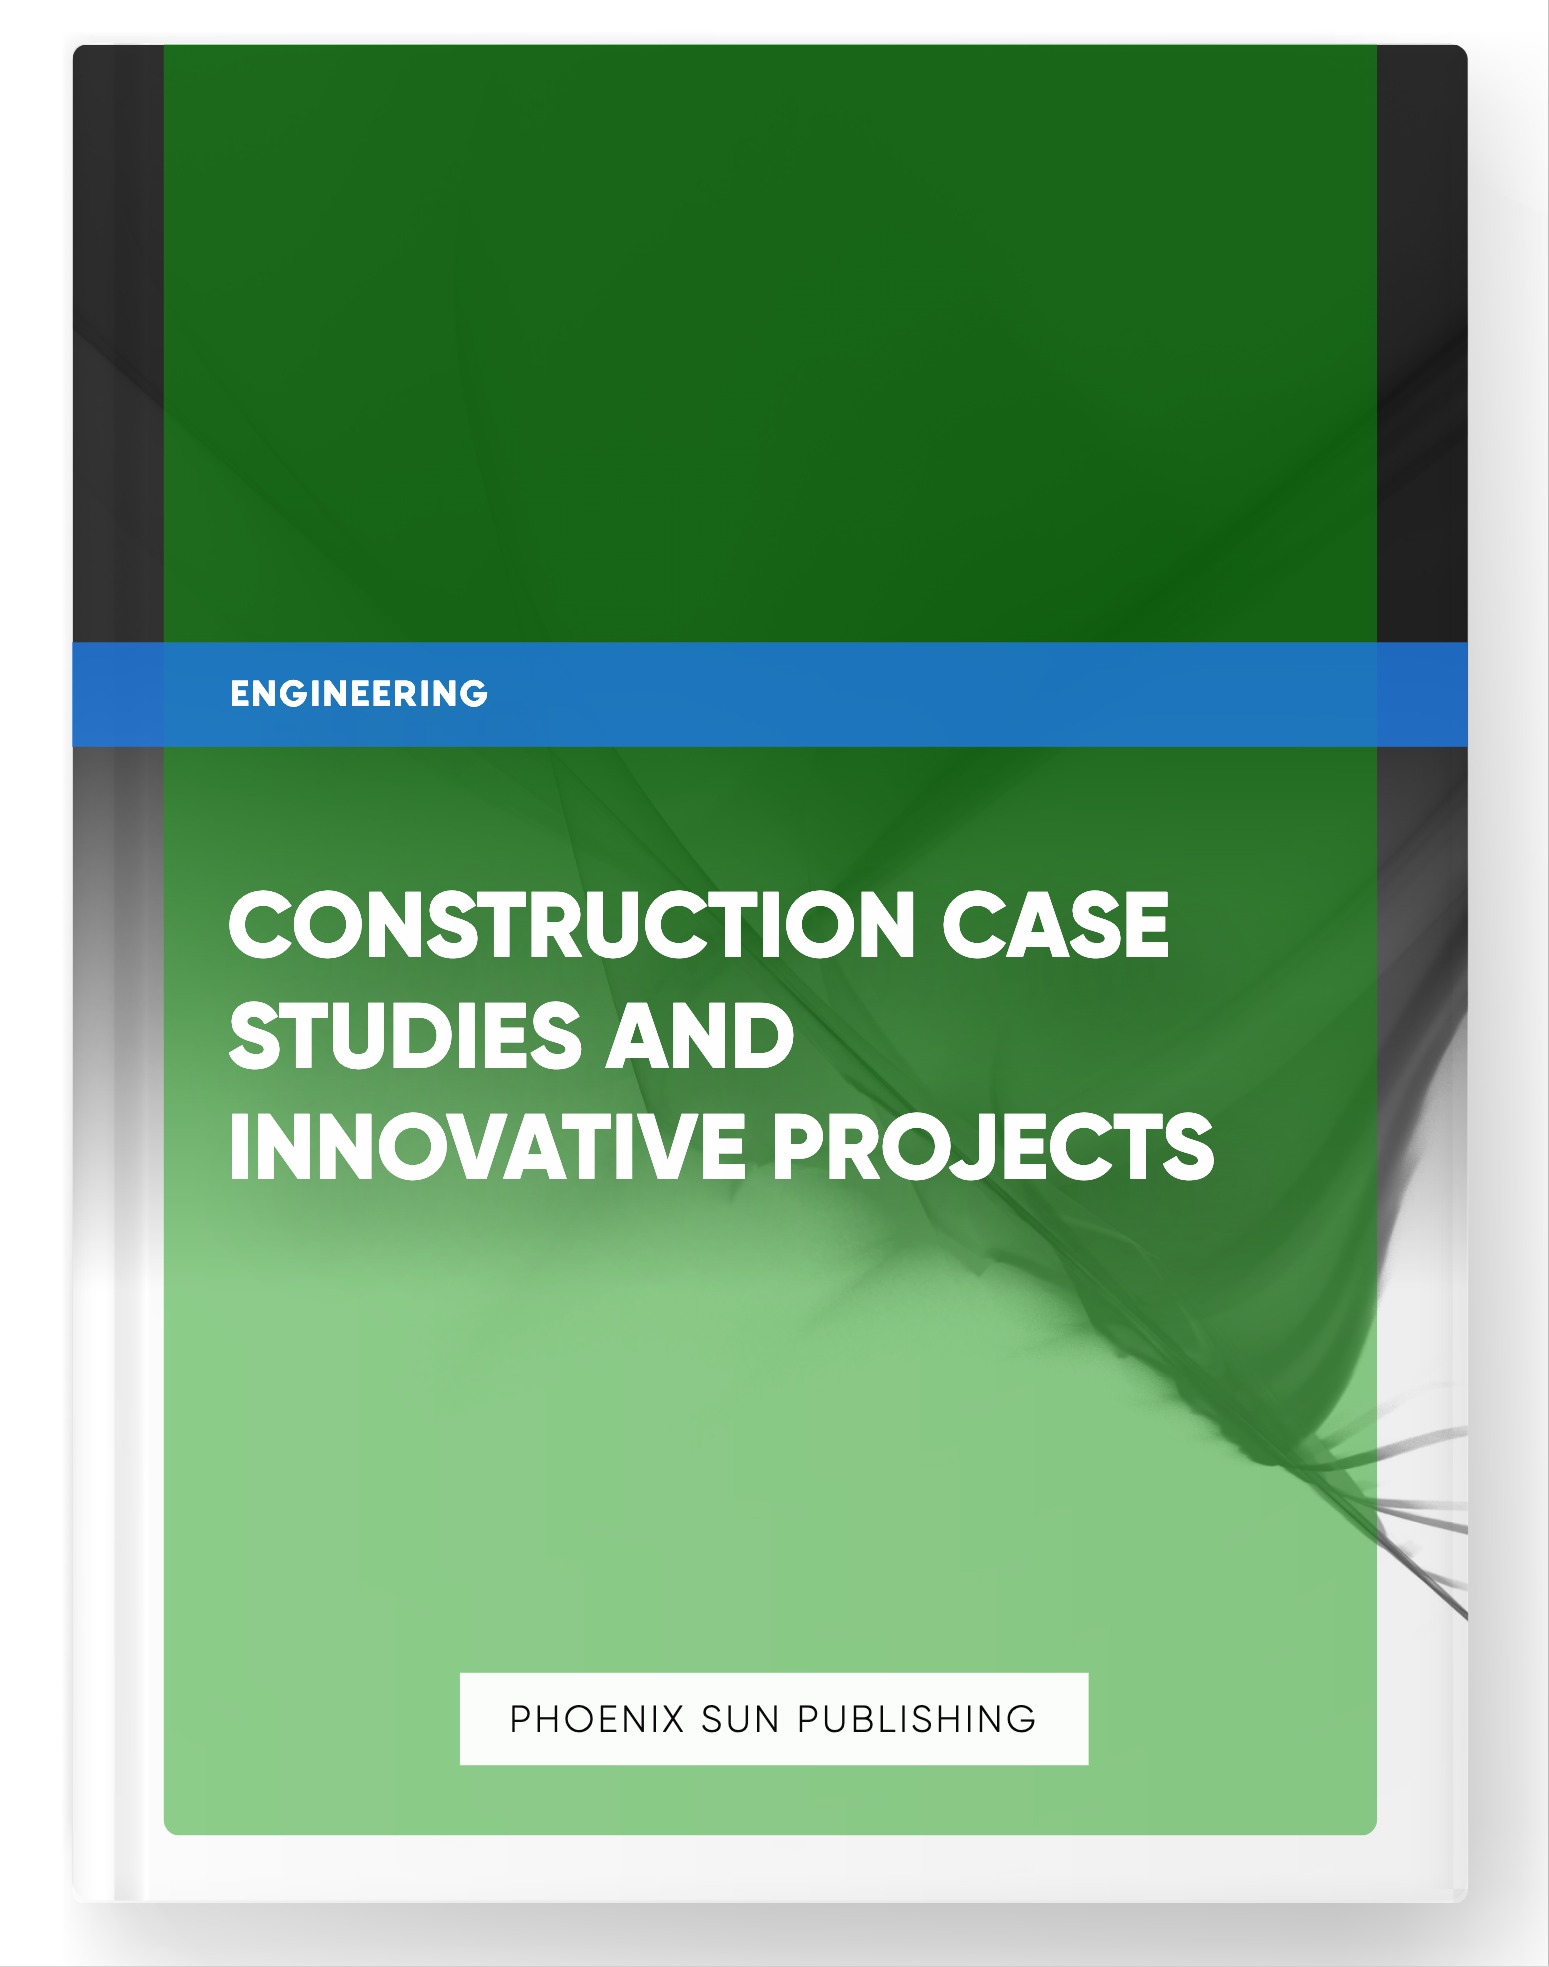 Construction Case Studies and Innovative Projects